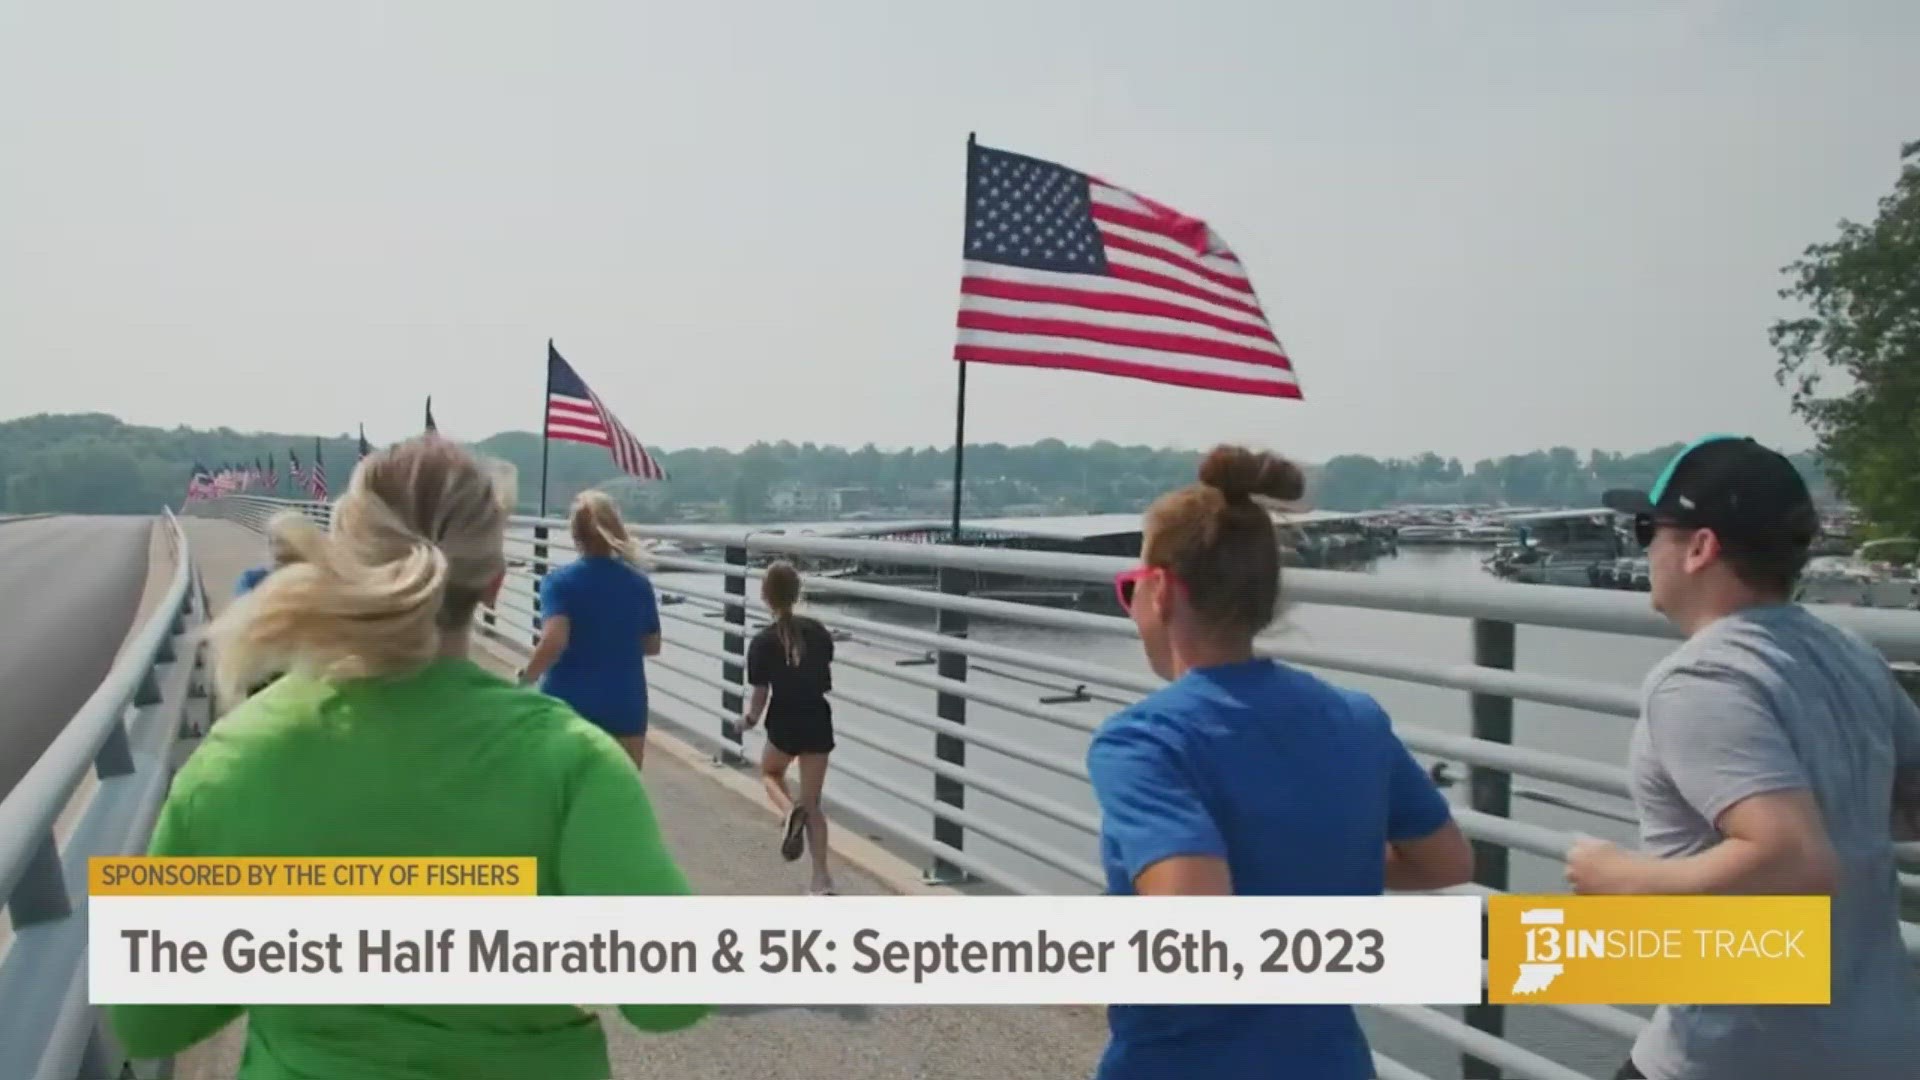 The Geist Half Marathon and 5K takes place on September 16, 2023. The 5K course has gotten an upgrade with more scenic views.